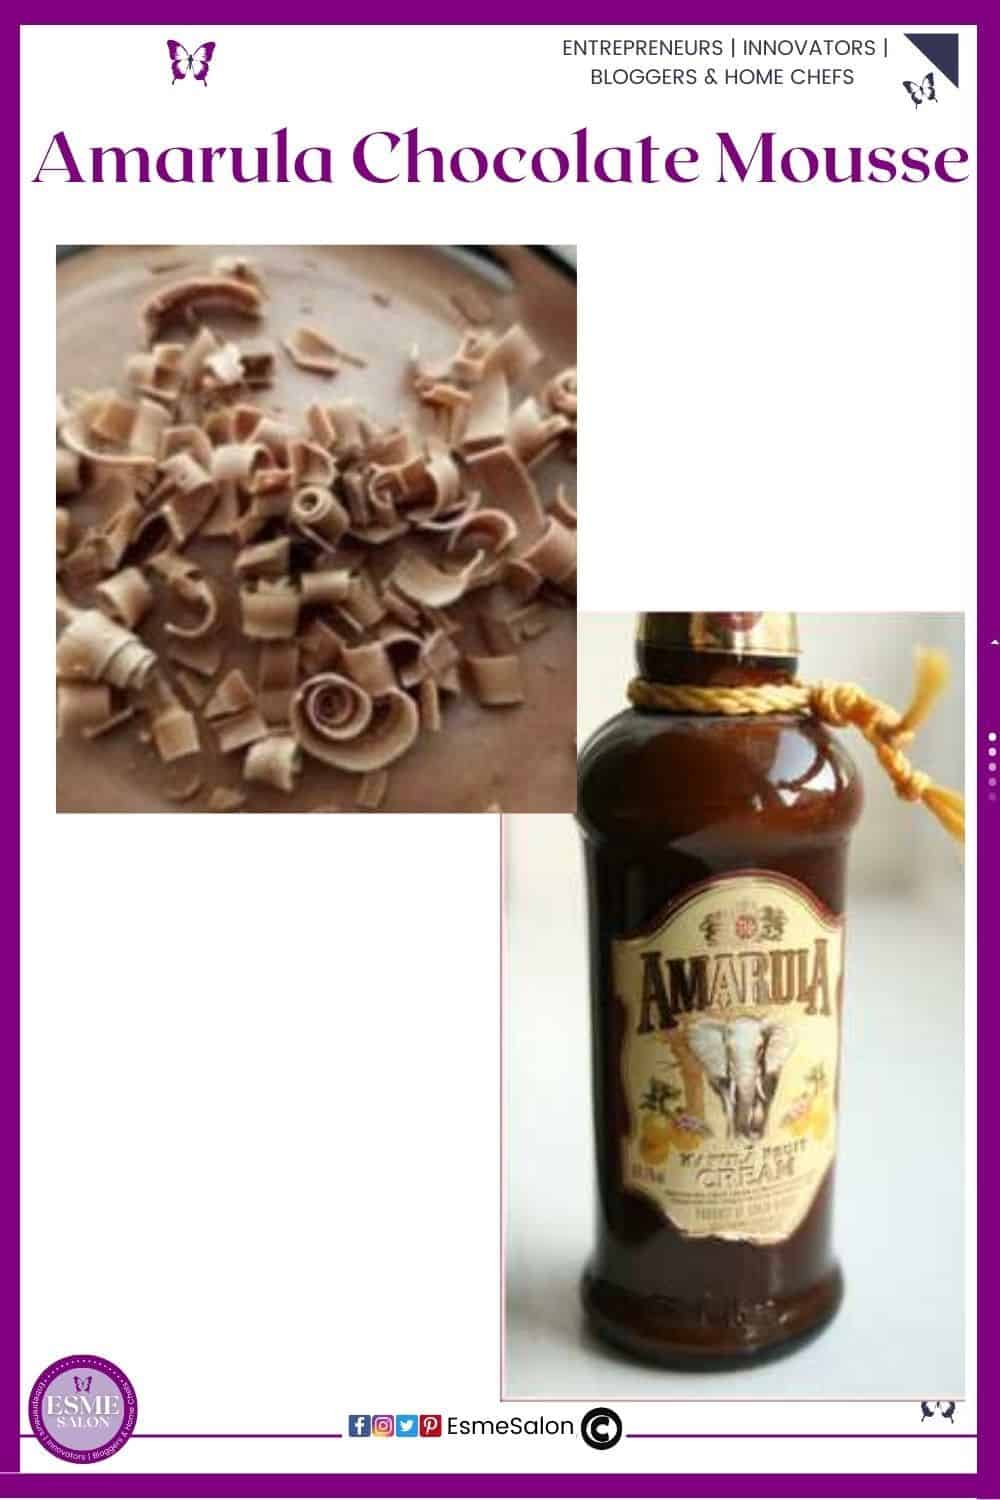 an image of an Amarula Chocolate Mousse as a single serving, with a bottle Amarula on the side